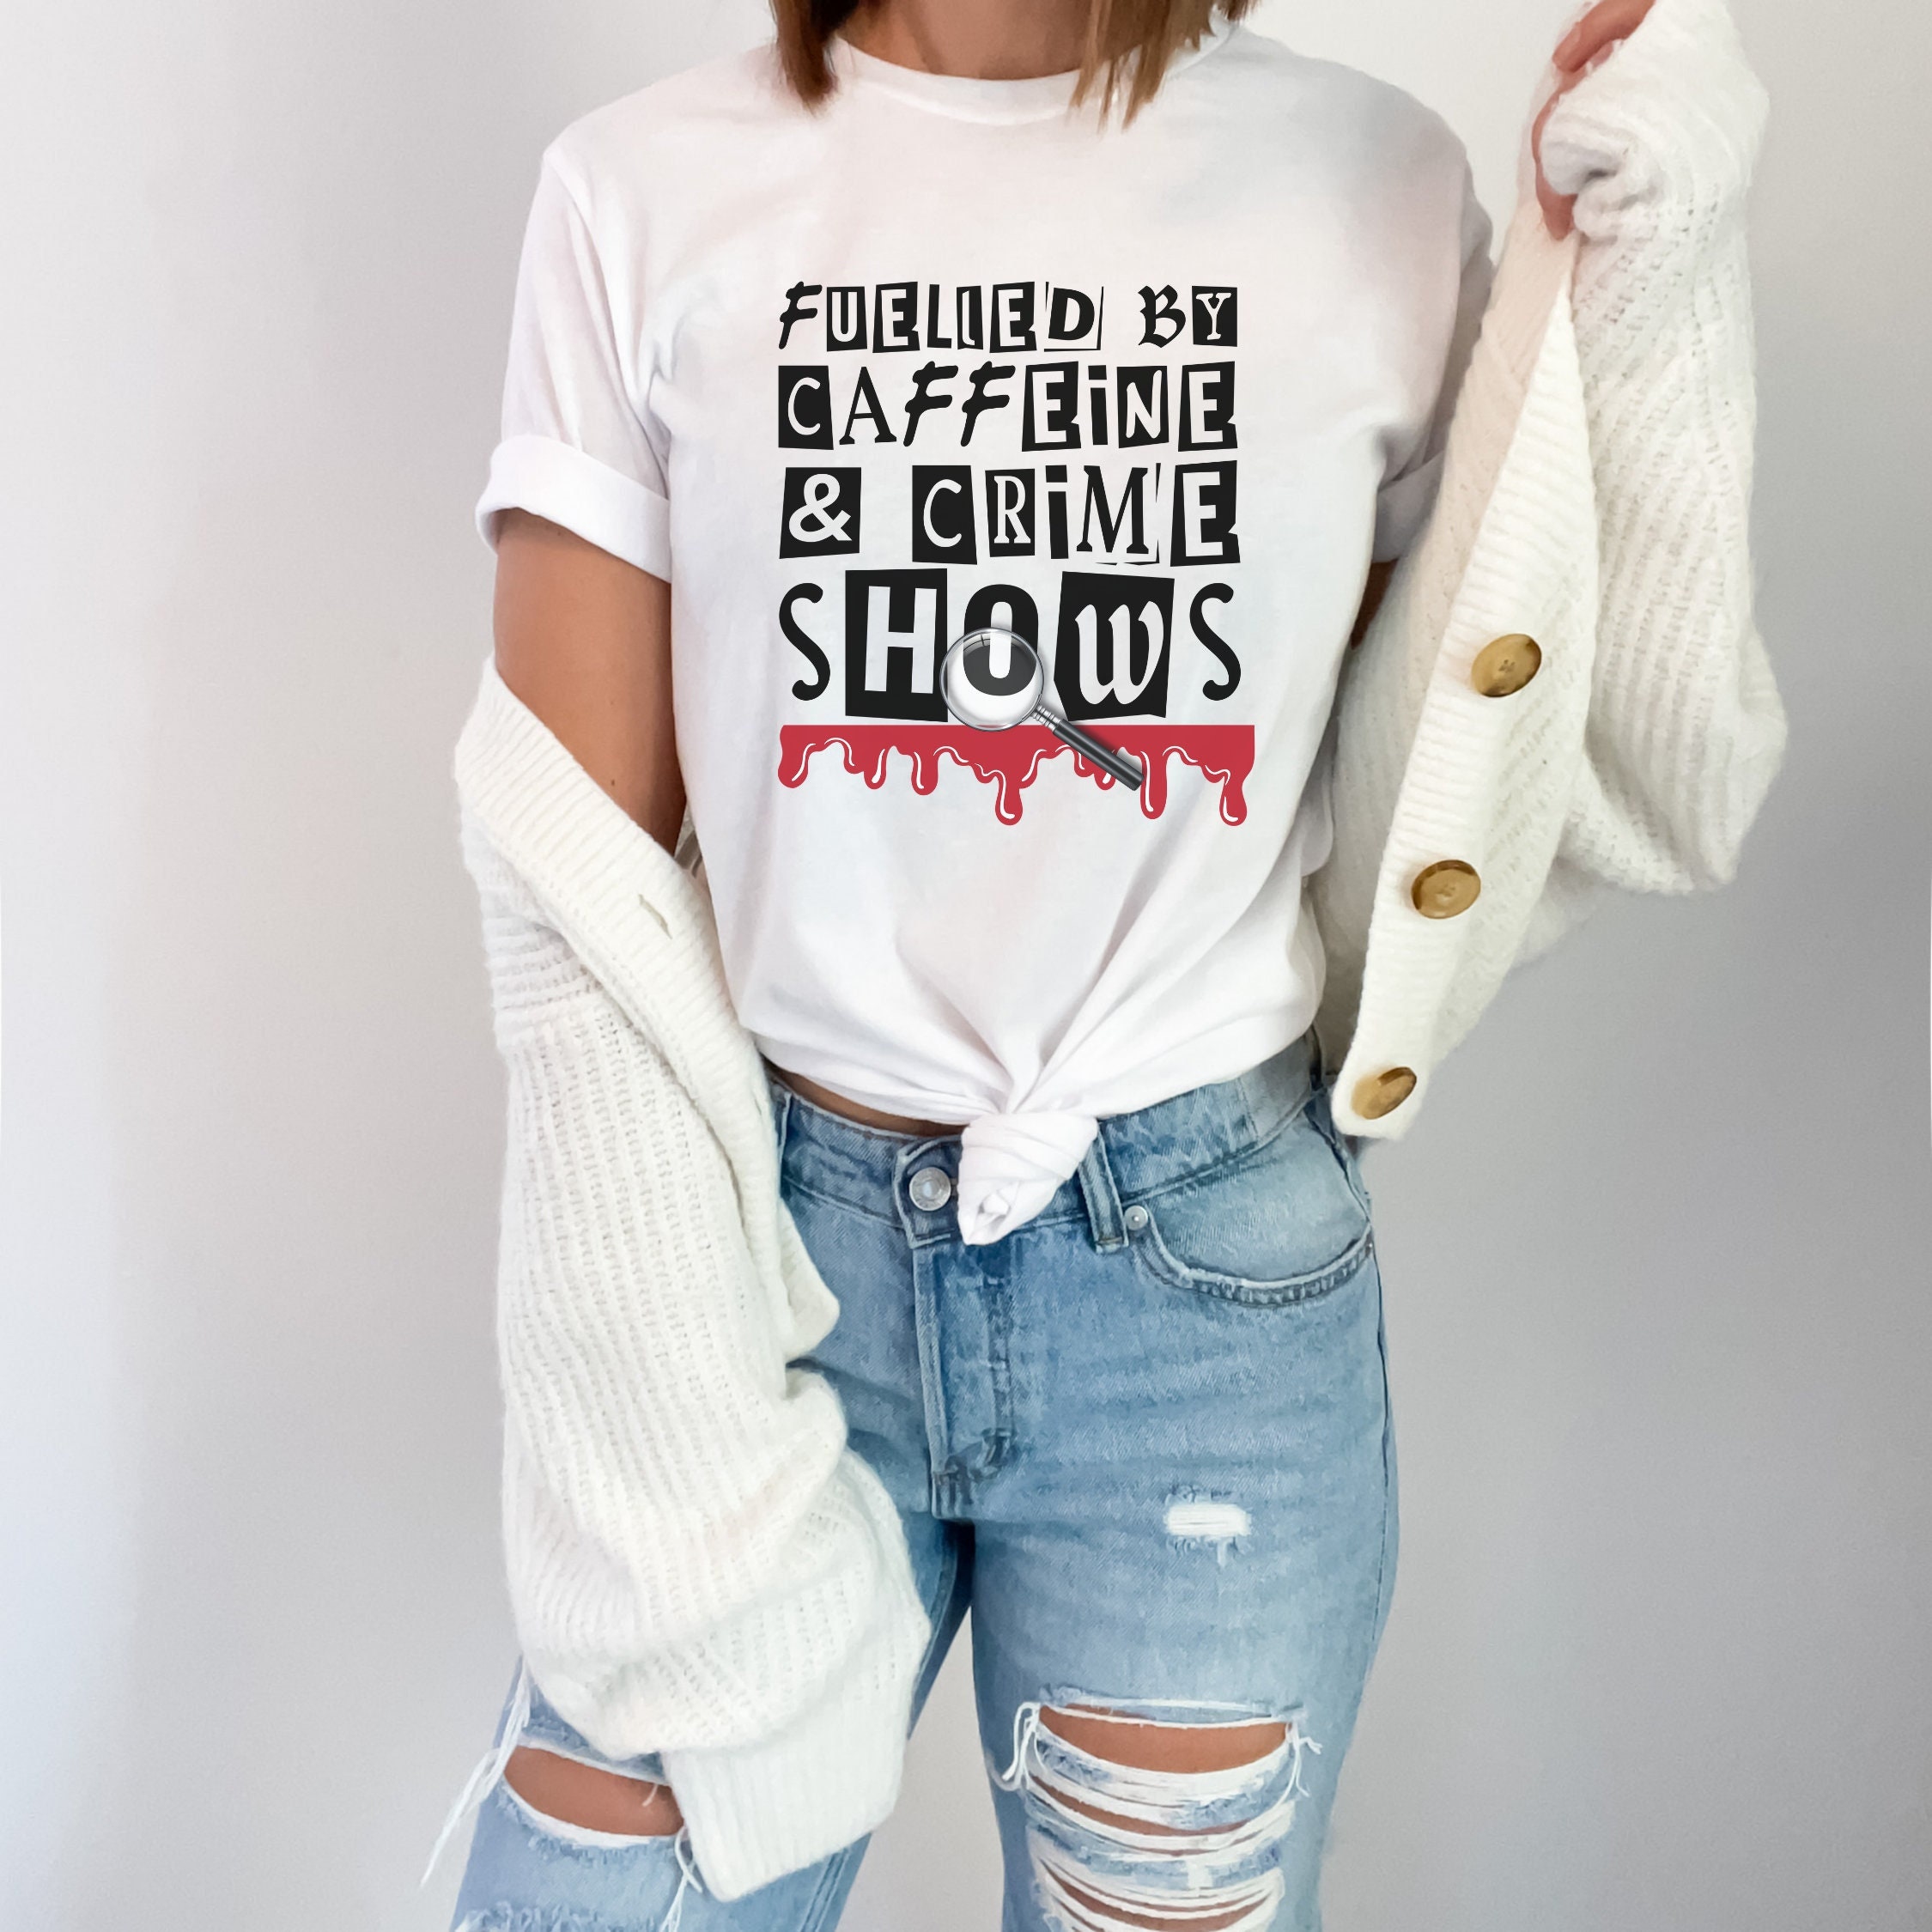 Fuelled by Caffeine and Crime Shows Tshirt True Crime Lover Shirt Gift for  Her True Crime and Coffee T Shirt Crime Lover Gift Coffee Lover 